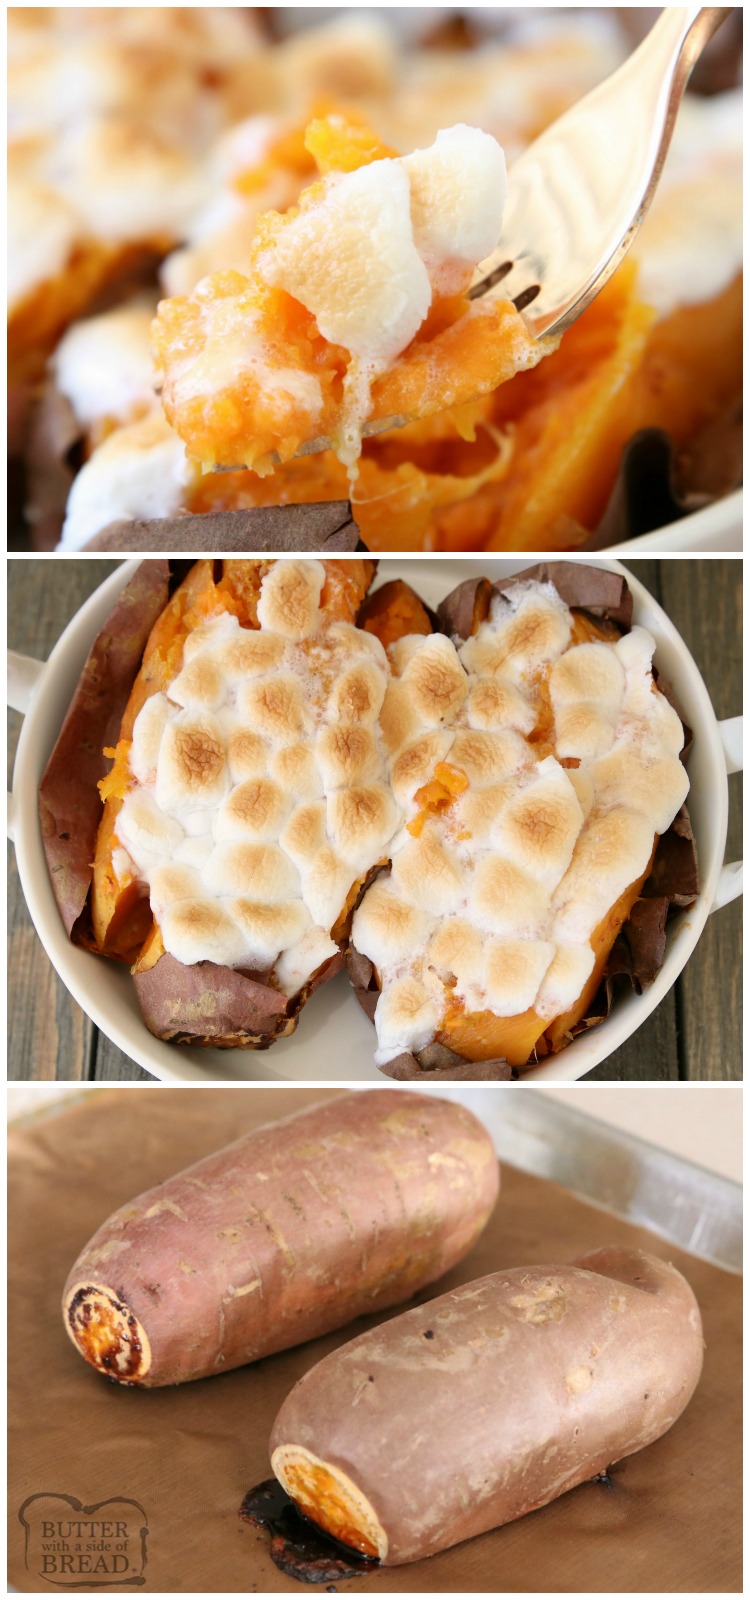 Baked Sweet Potato using the easiest method ever! Super simple, tried and true way that shows just how easy it is to bake a sweet potato. #sweetpotatoes #sweetpotato #baking #food #recipe